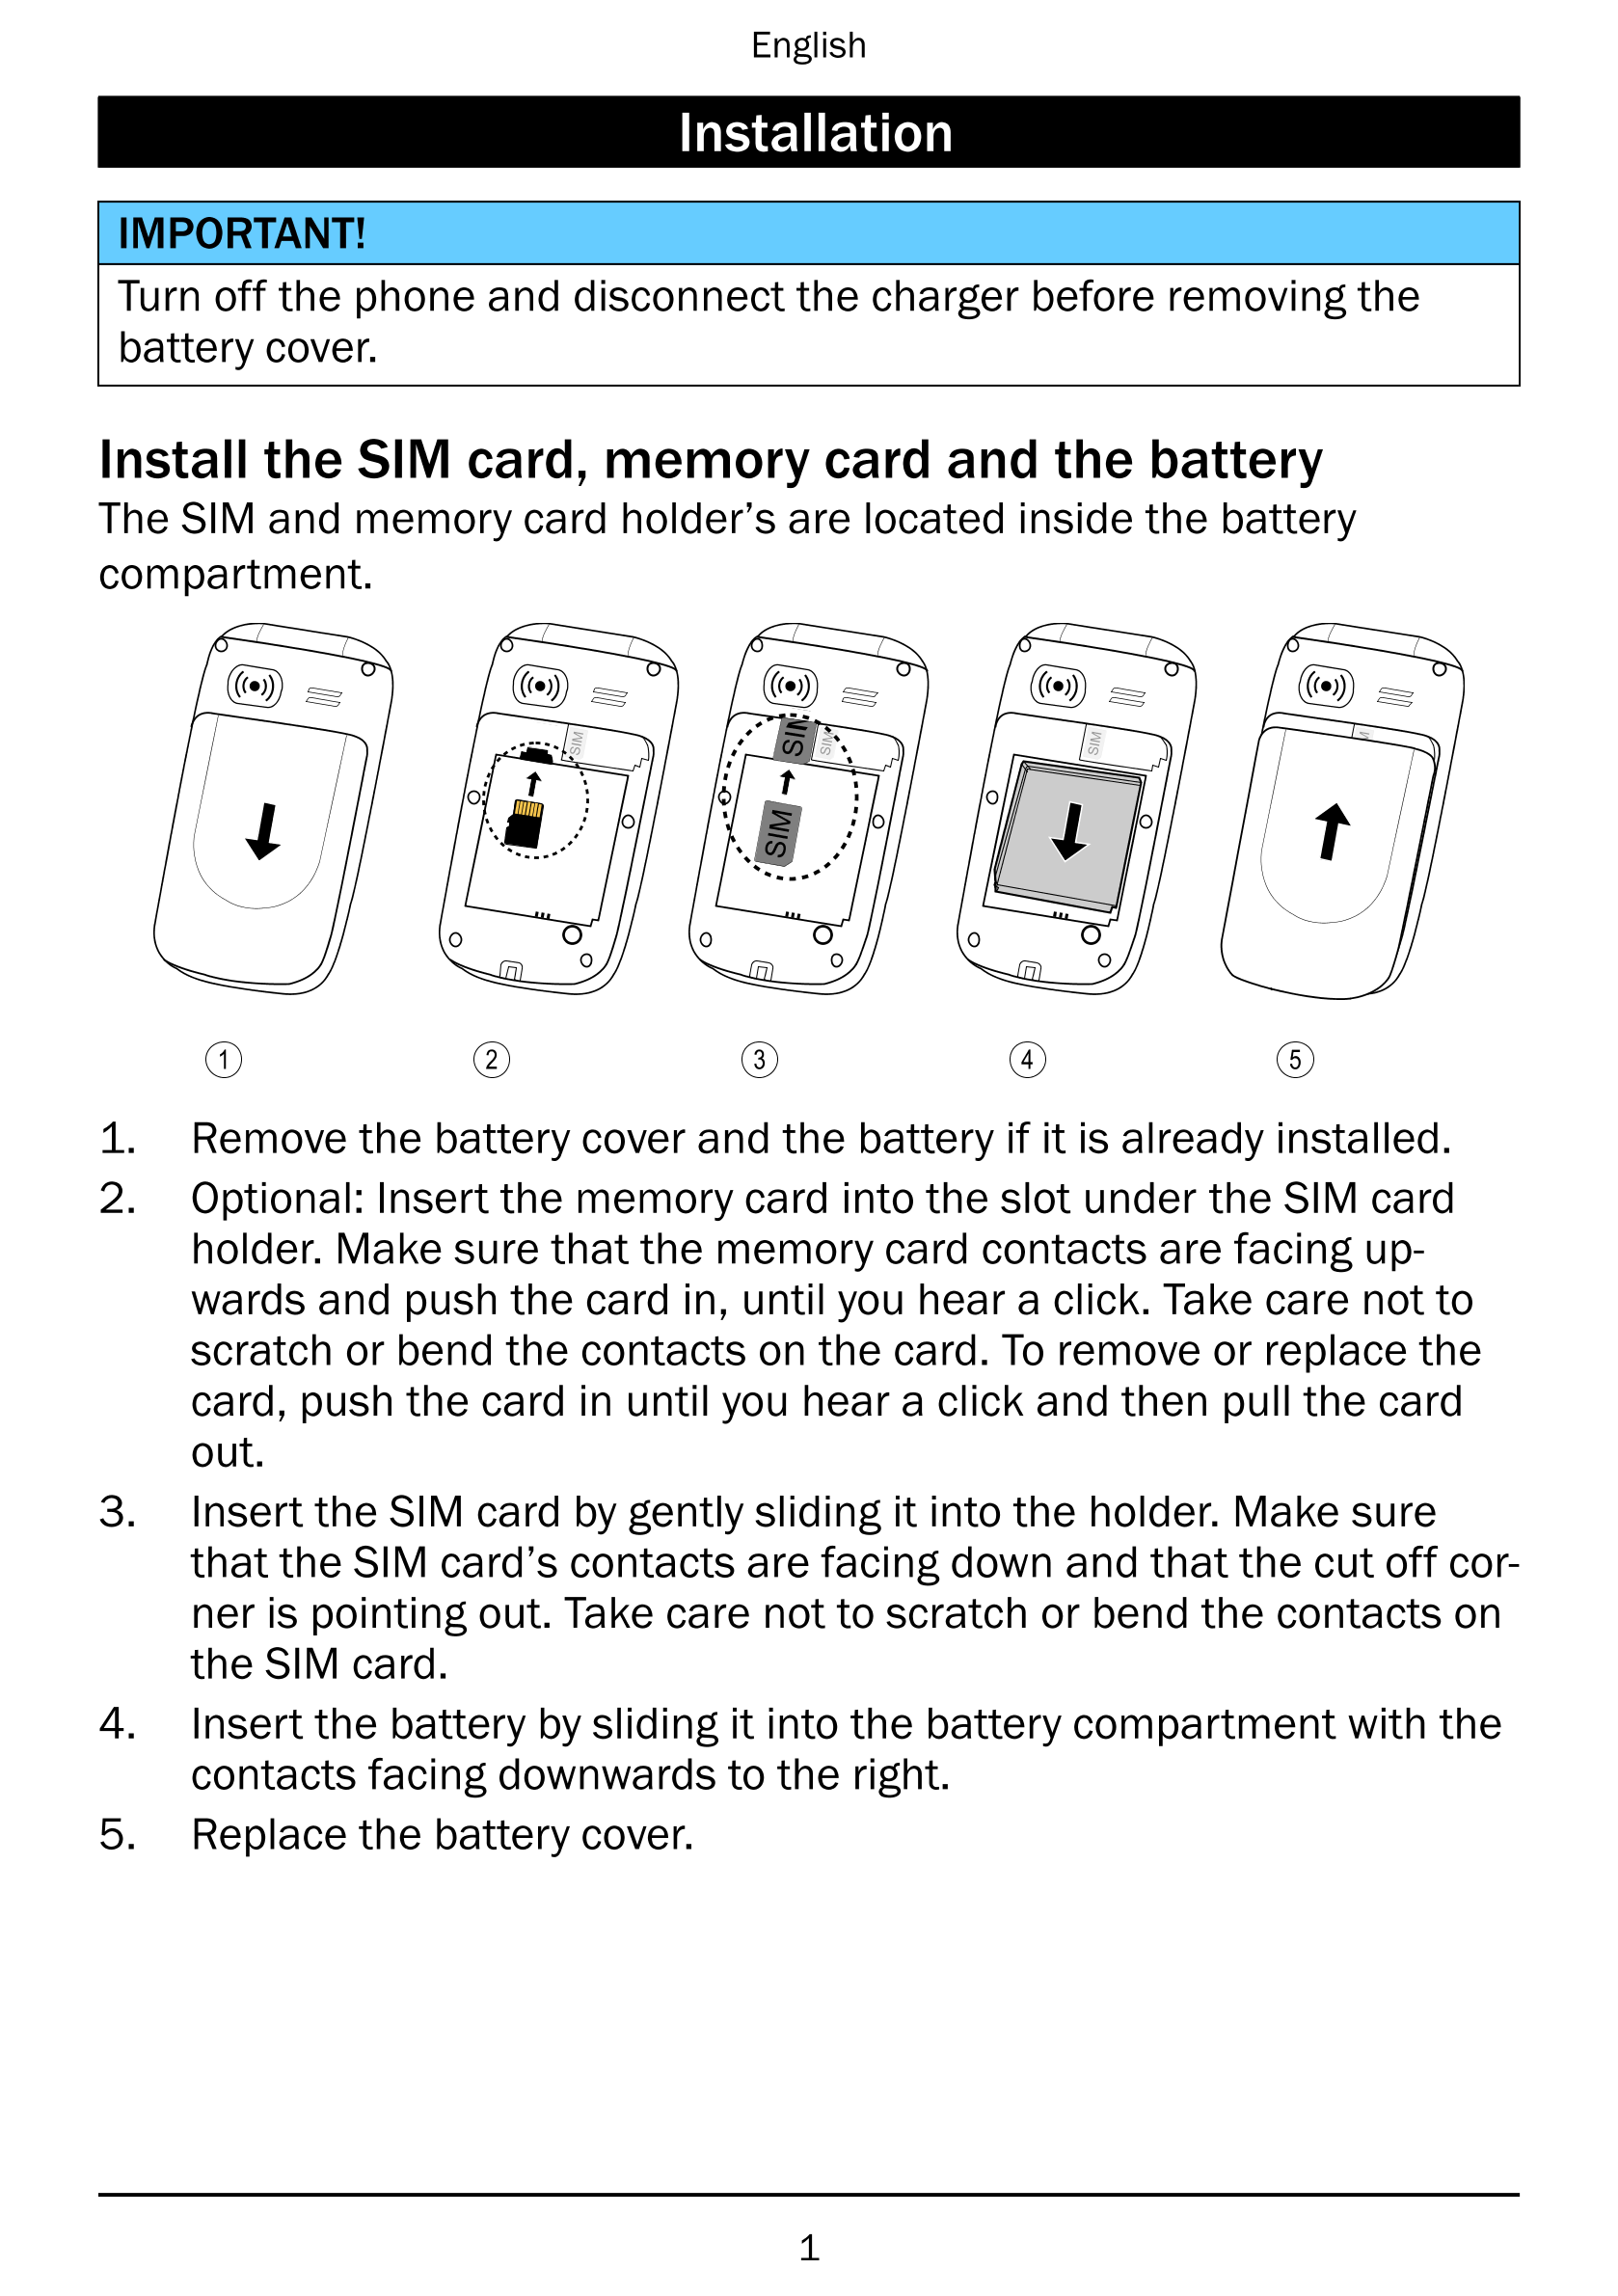 English
Installation
IMPORTANT!
Turn off the phone and disconnect the charger before removing the
battery cover.
Install the SIM